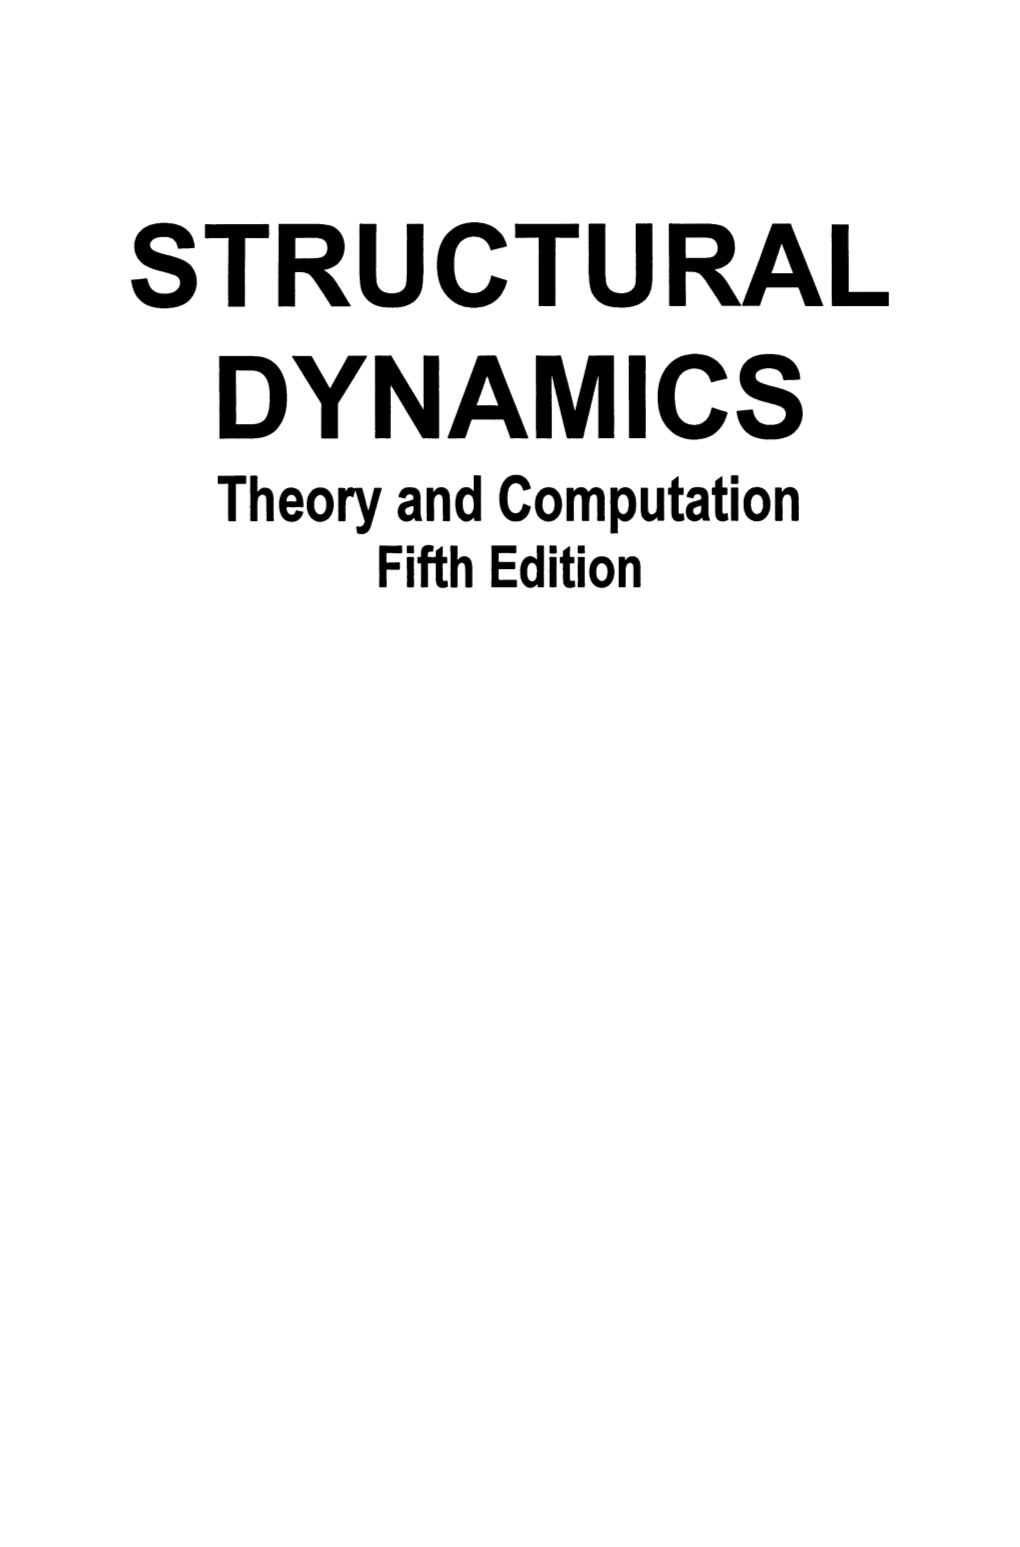 STRUCTURAL DYNAMICS Theory and Computation Fifth Edition STRUCTURAL DYNAMICS Theory and Computation Fifth Edition